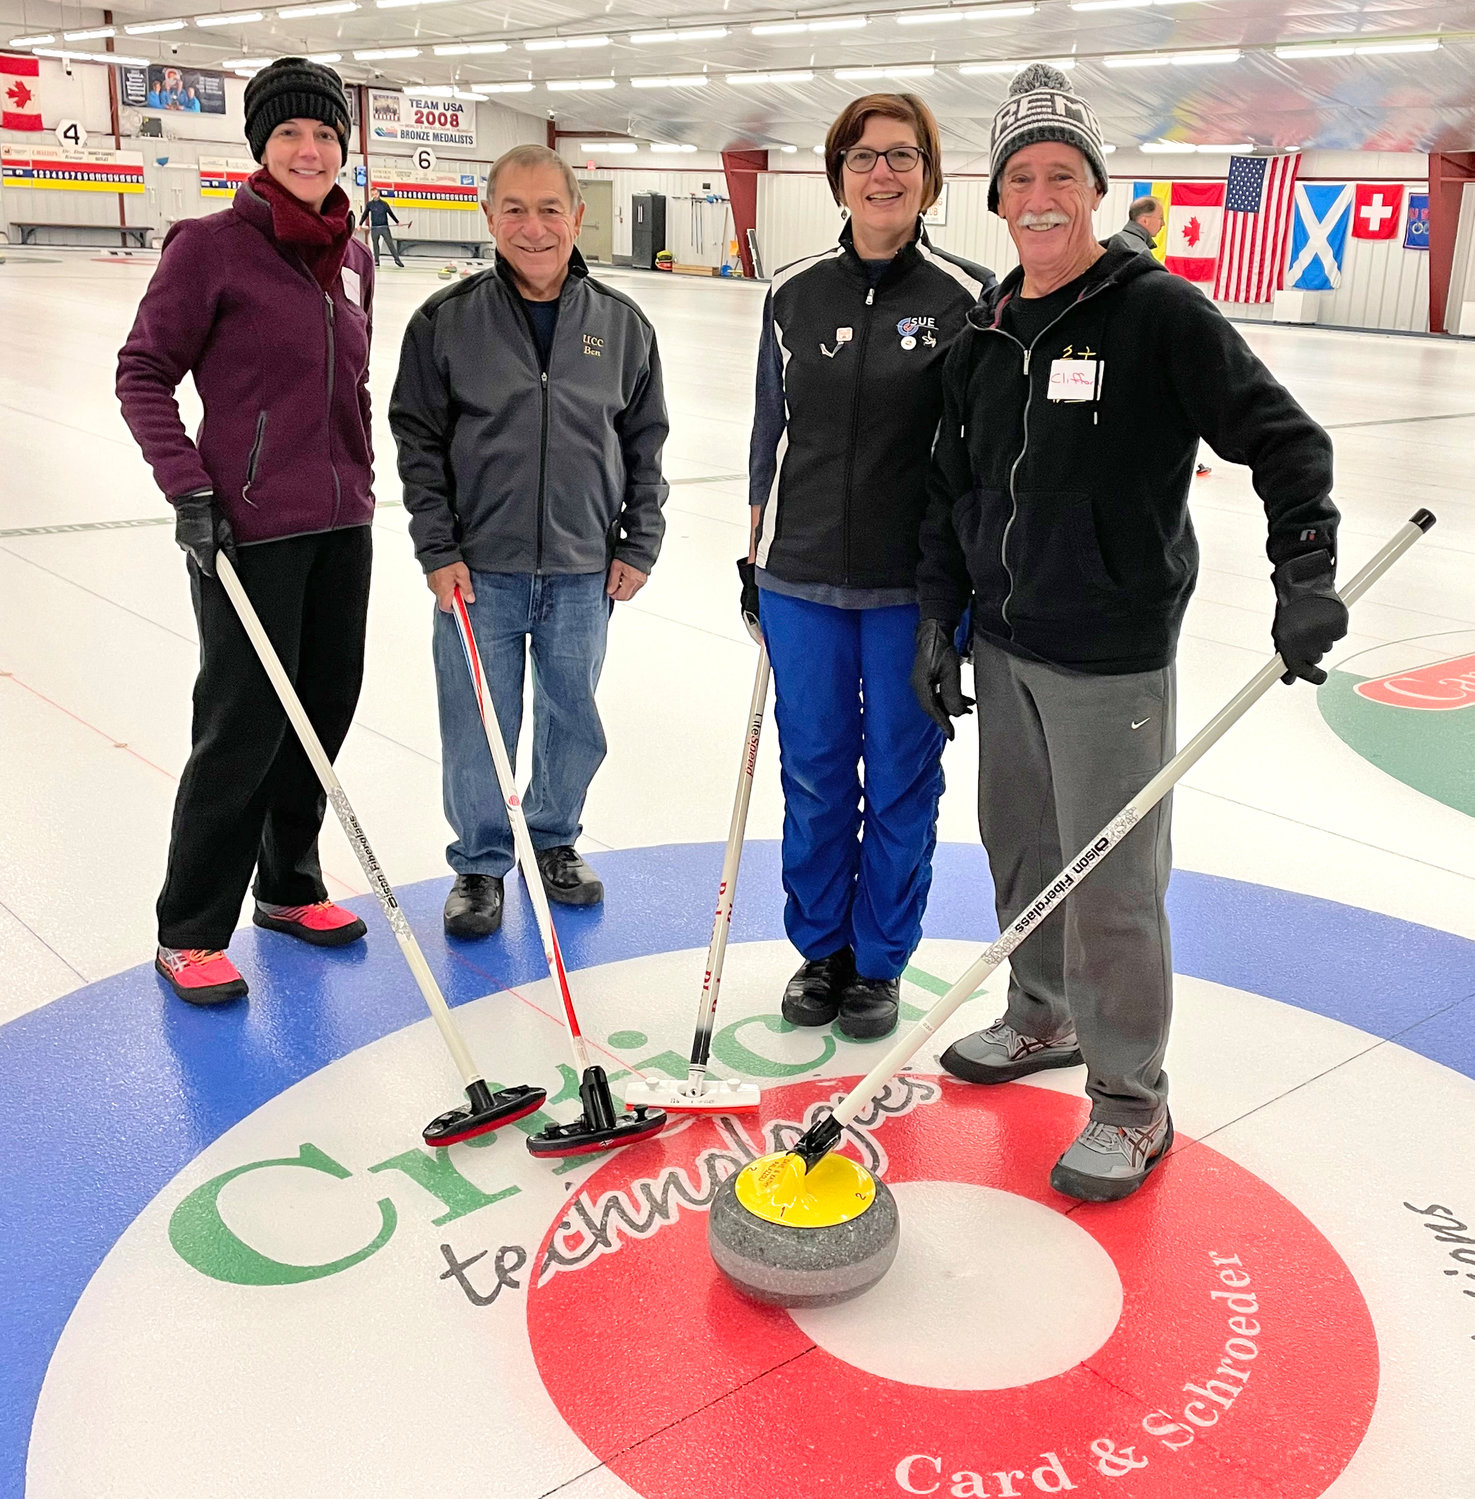 A great indoor activity for winter, Clifford Crandall Jr. recently enjoyed learning the sport of curling at Utica Curling Club. From left are Amanda Crandall, Ben Gaetano, Sue Hansen and Crandall.